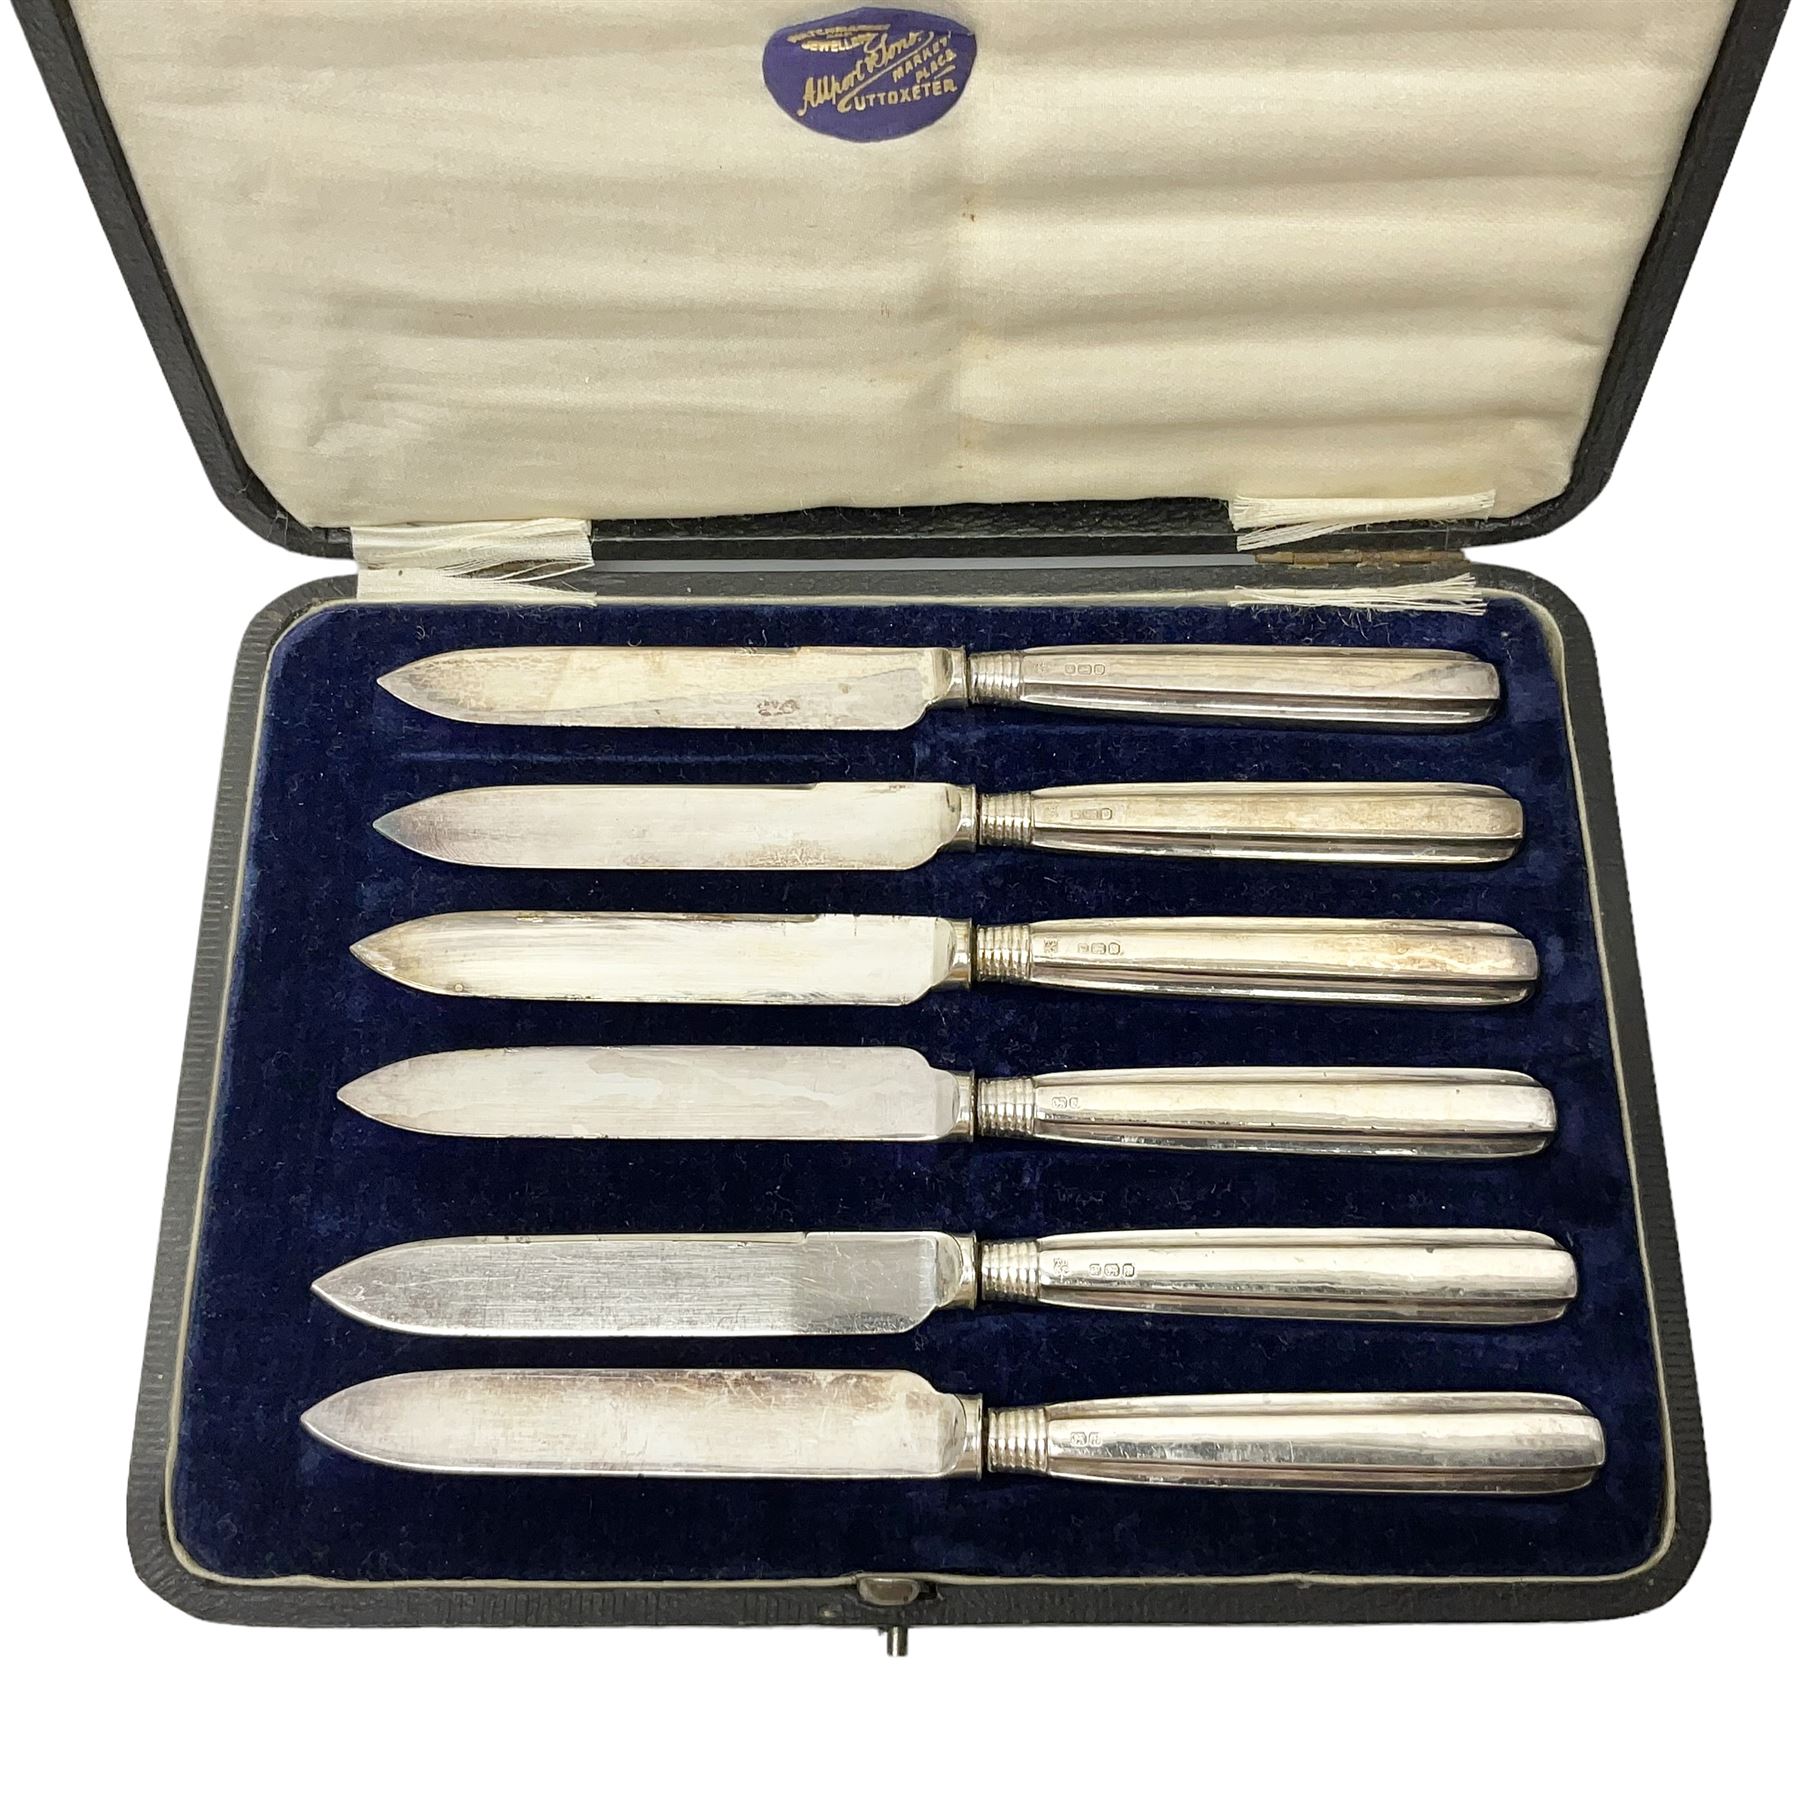 Early 20th century set of six silver handled knives